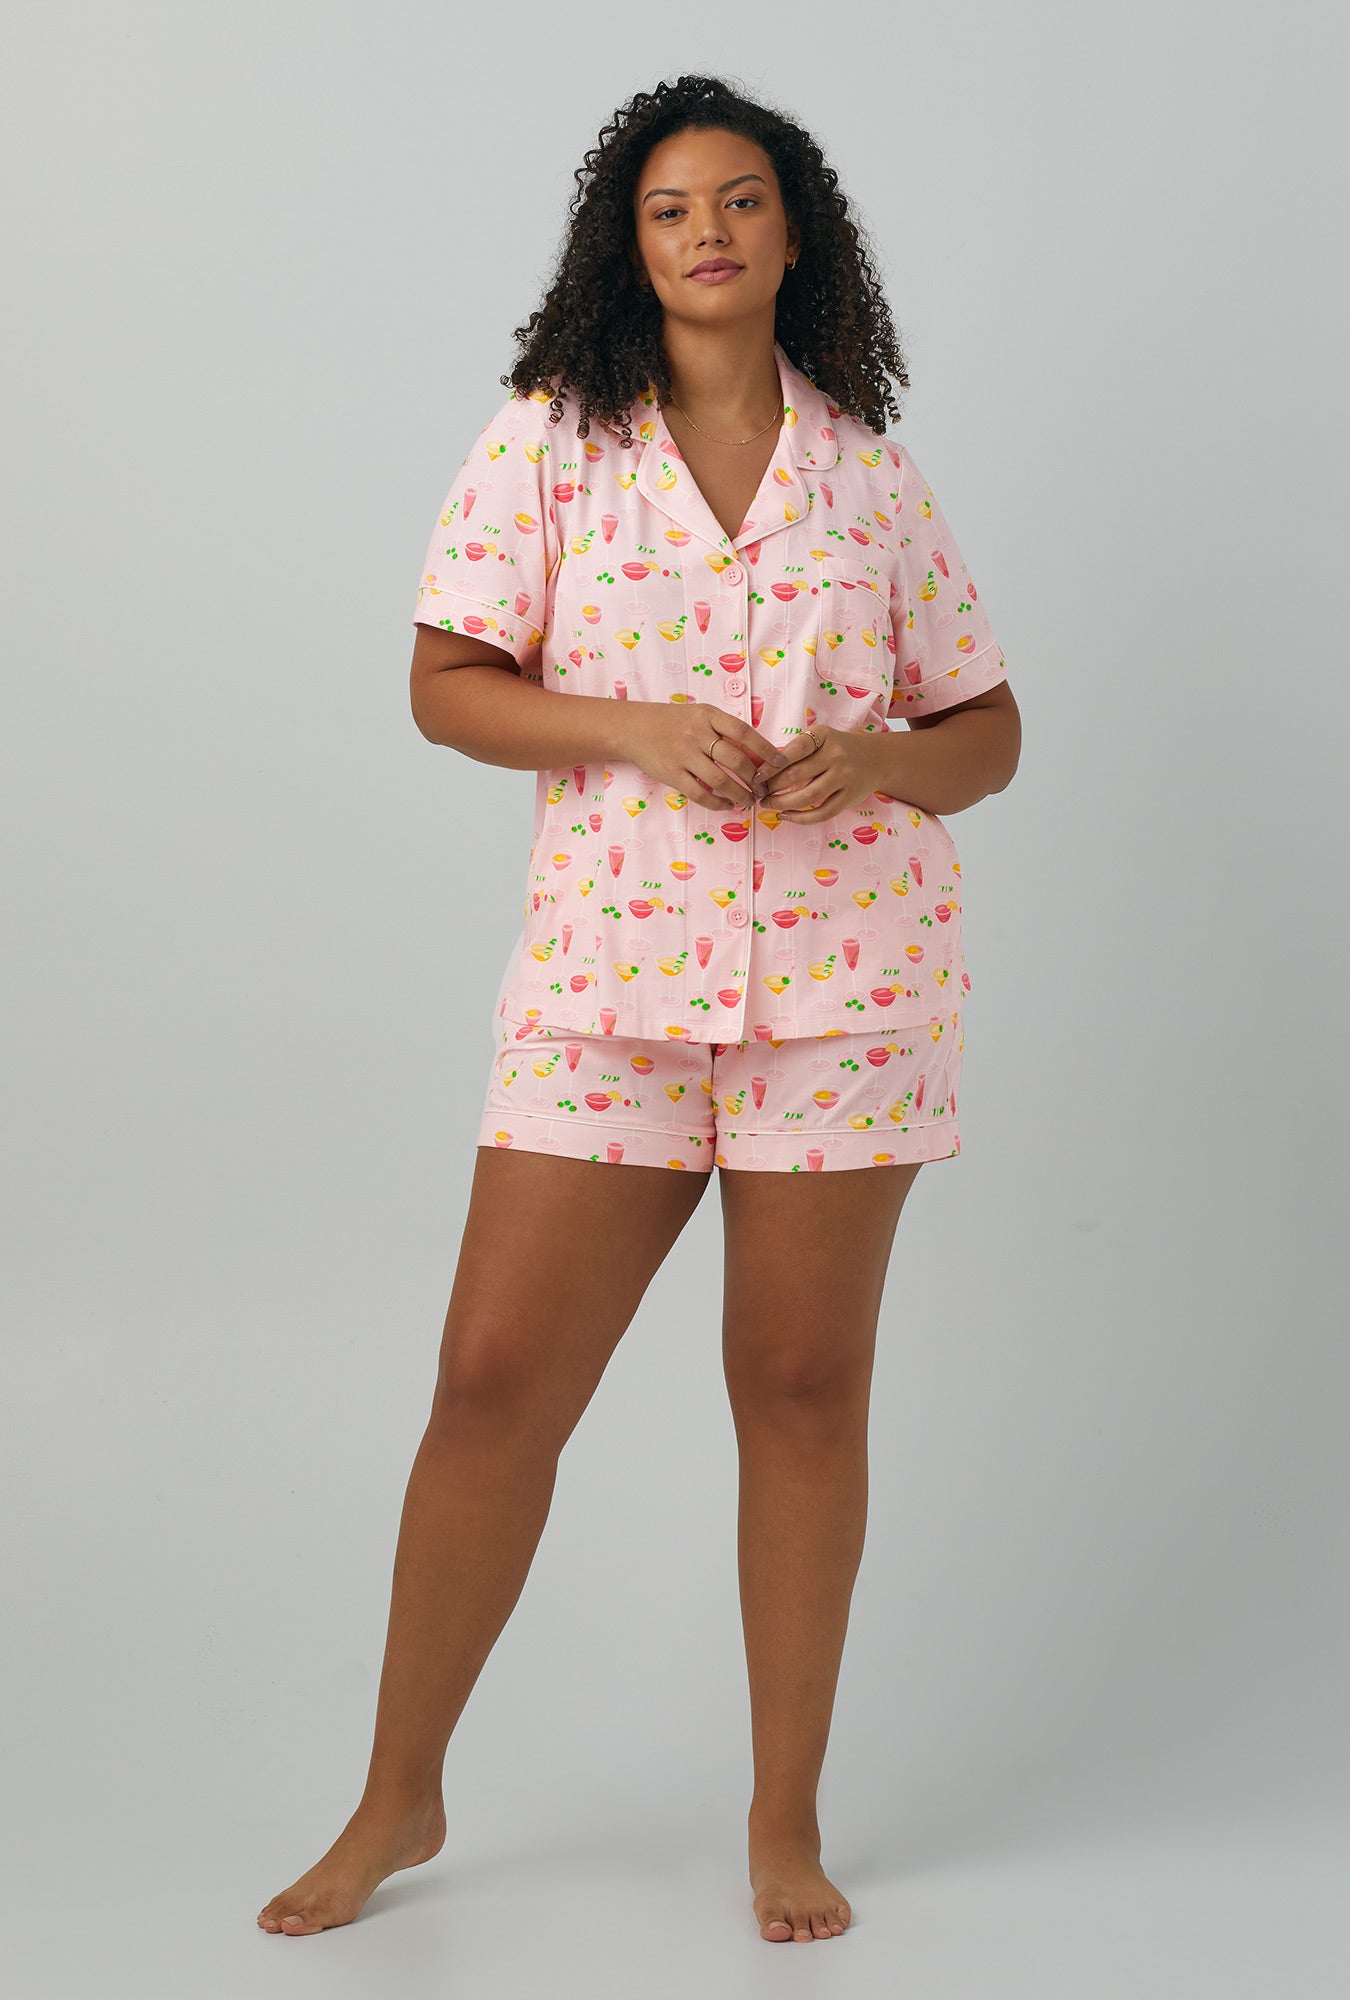 A lady wearing pink Short Sleeve Classic Shorty Stretch Jersey PJ Set with Pink Mixology print